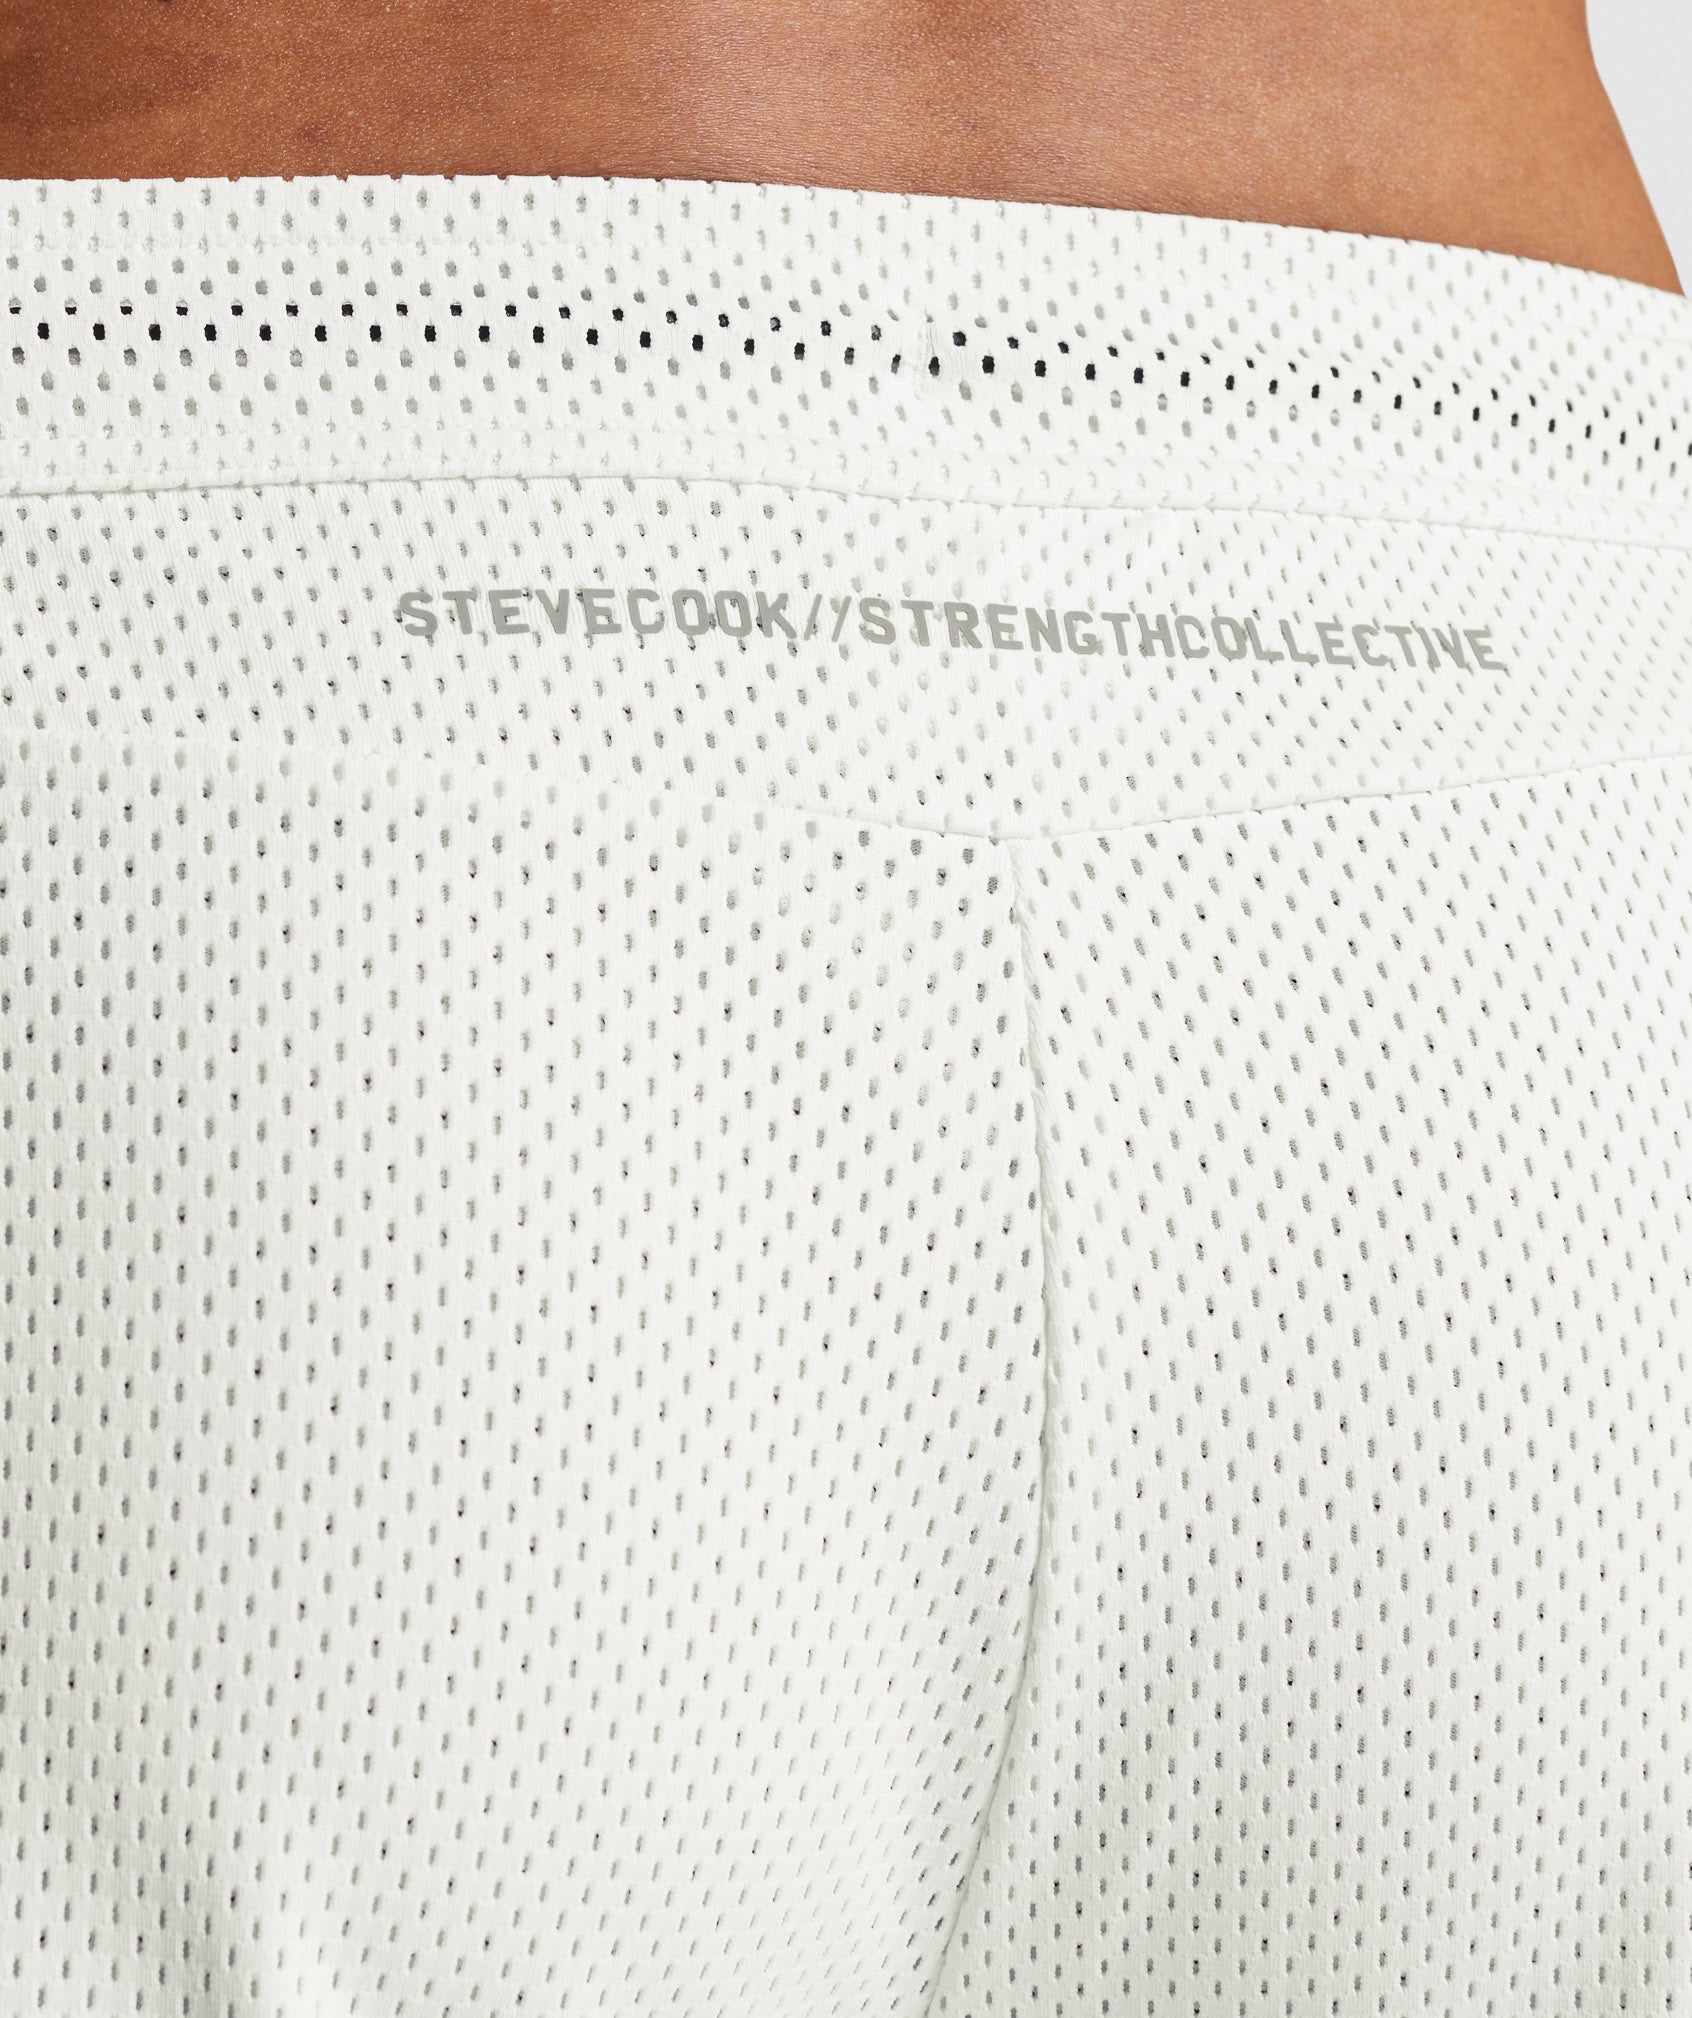 Gymshark//Steve Cook Mesh Shorts in Off White - view 6